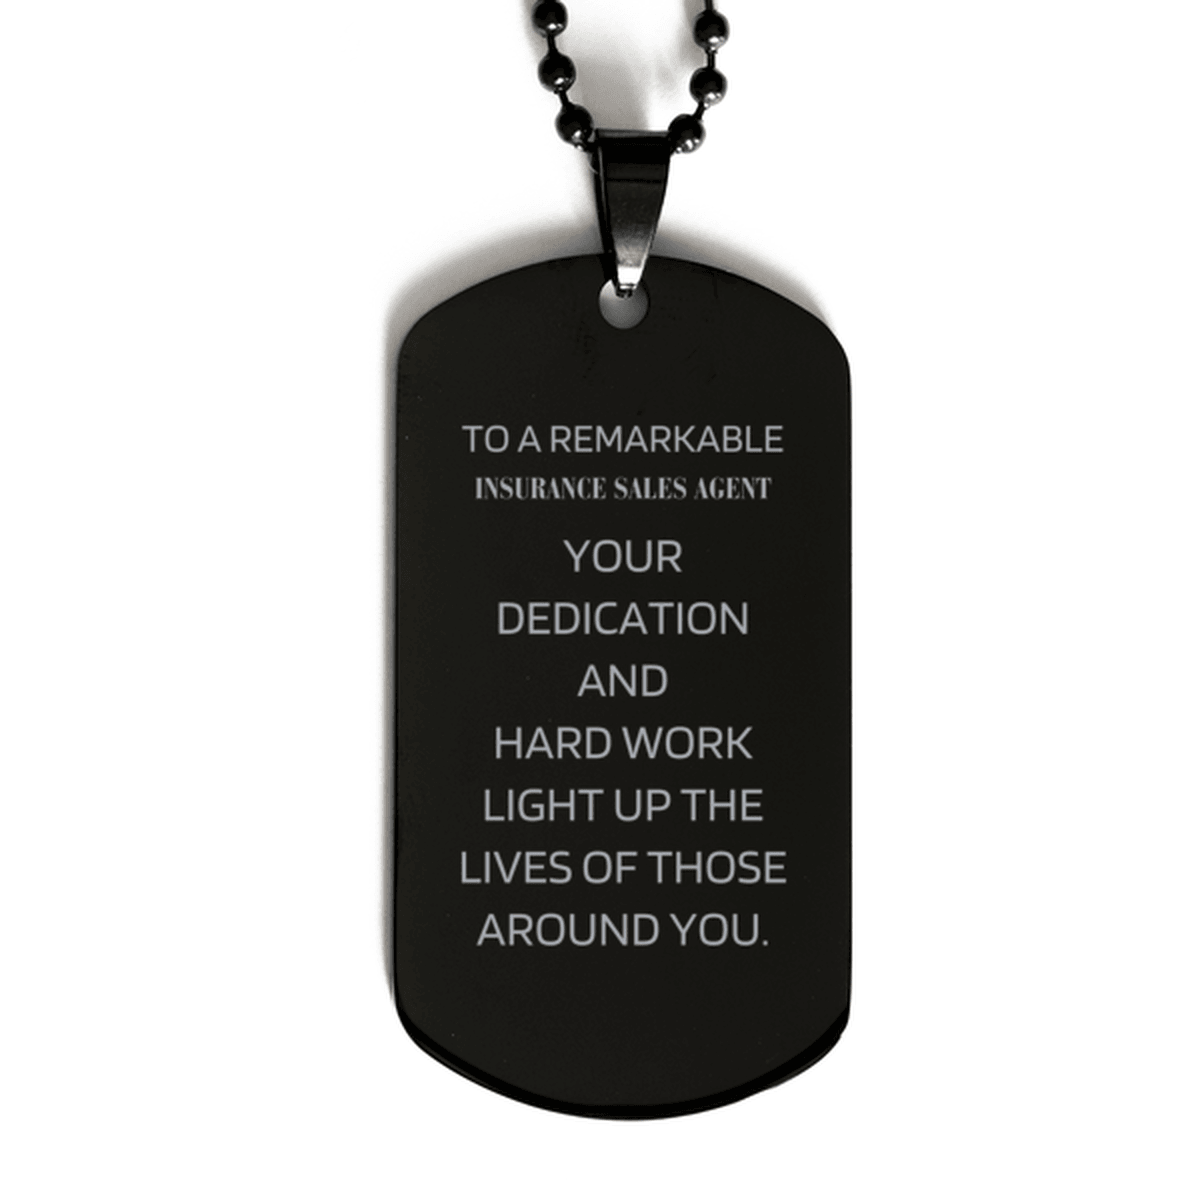 Remarkable Insurance Sales Agent Gifts, Your dedication and hard work, Inspirational Birthday Christmas Unique Black Dog Tag For Insurance Sales Agent, Coworkers, Men, Women, Friends - Mallard Moon Gift Shop